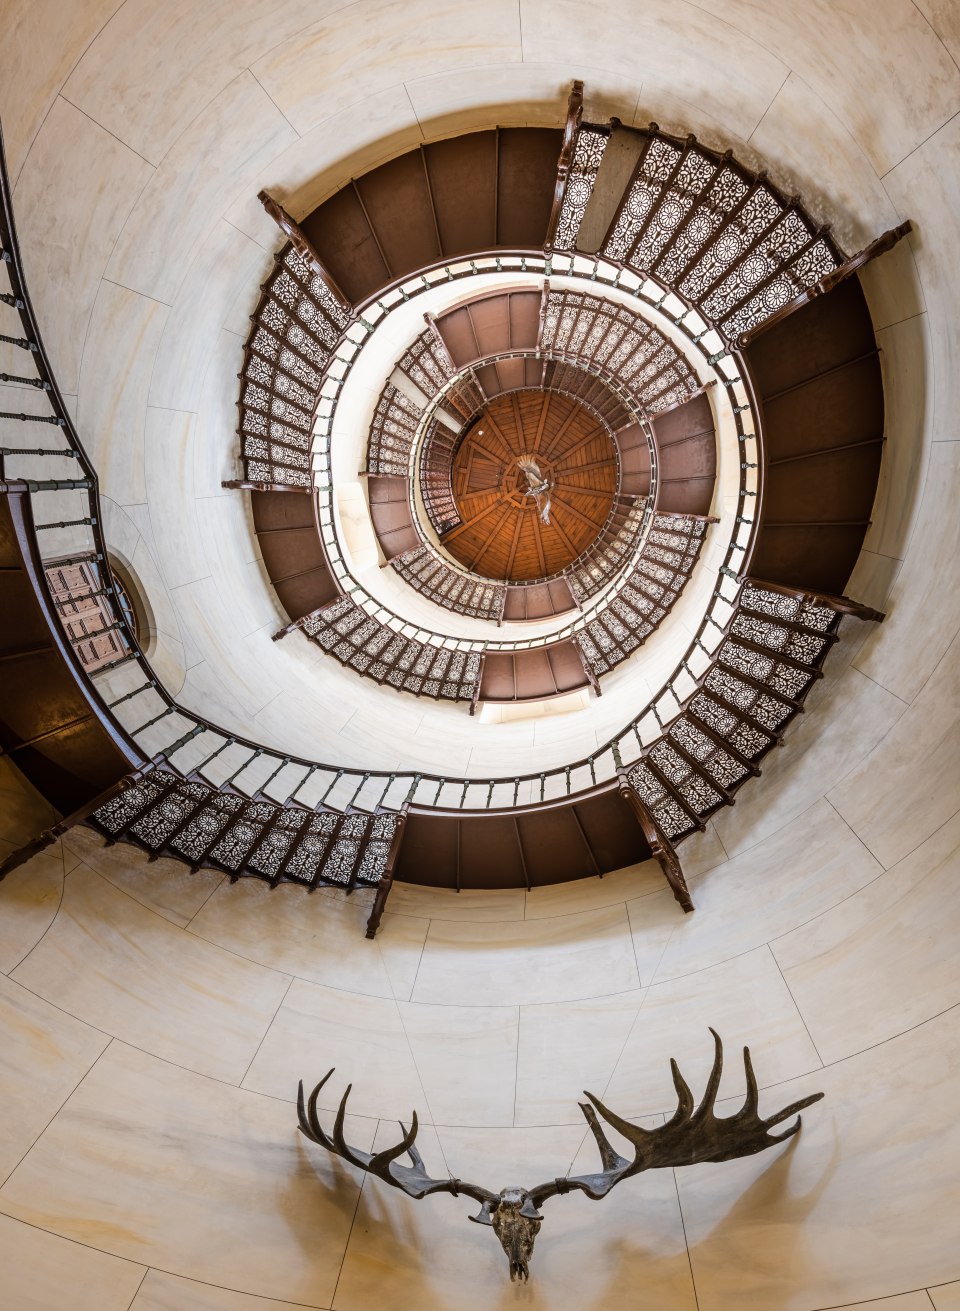 The free-floating staircase in the central tower., © TMV/Tiemann